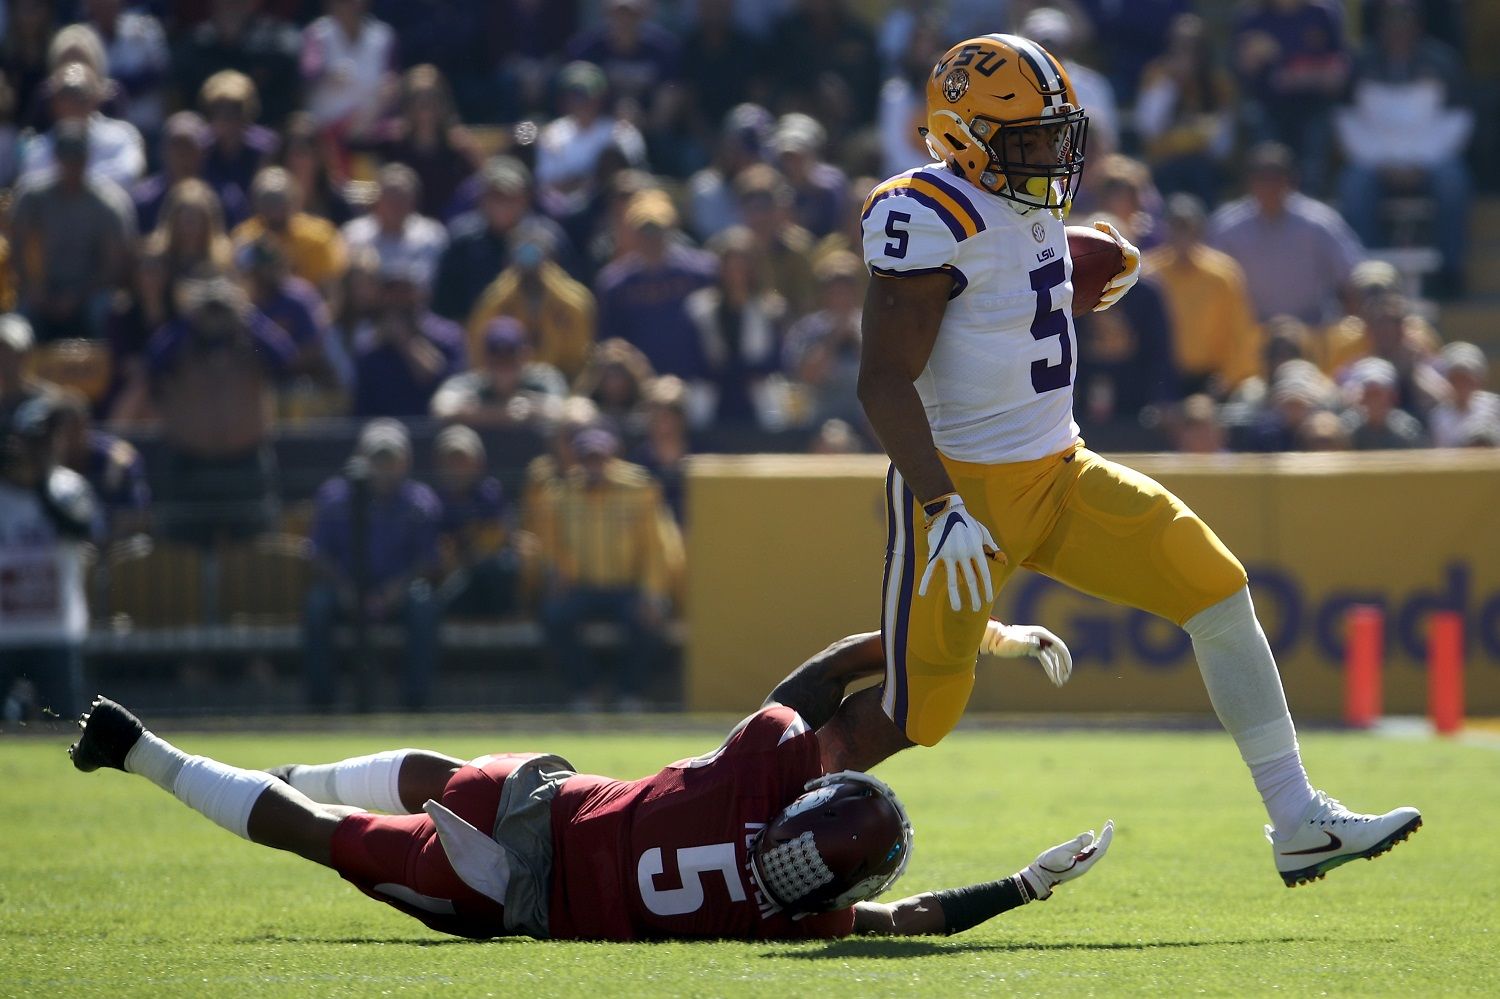 BATON ROUGE, LA - NOVEMBER 11:  Derrius Guice #5 of the LSU Tigers avoids a tackle by Henre' Toliver #5 of the Arkansas Razorbacks at Tiger Stadium on November 11, 2017 in Baton Rouge, Louisiana.  (Photo by Chris Graythen/Getty Images)